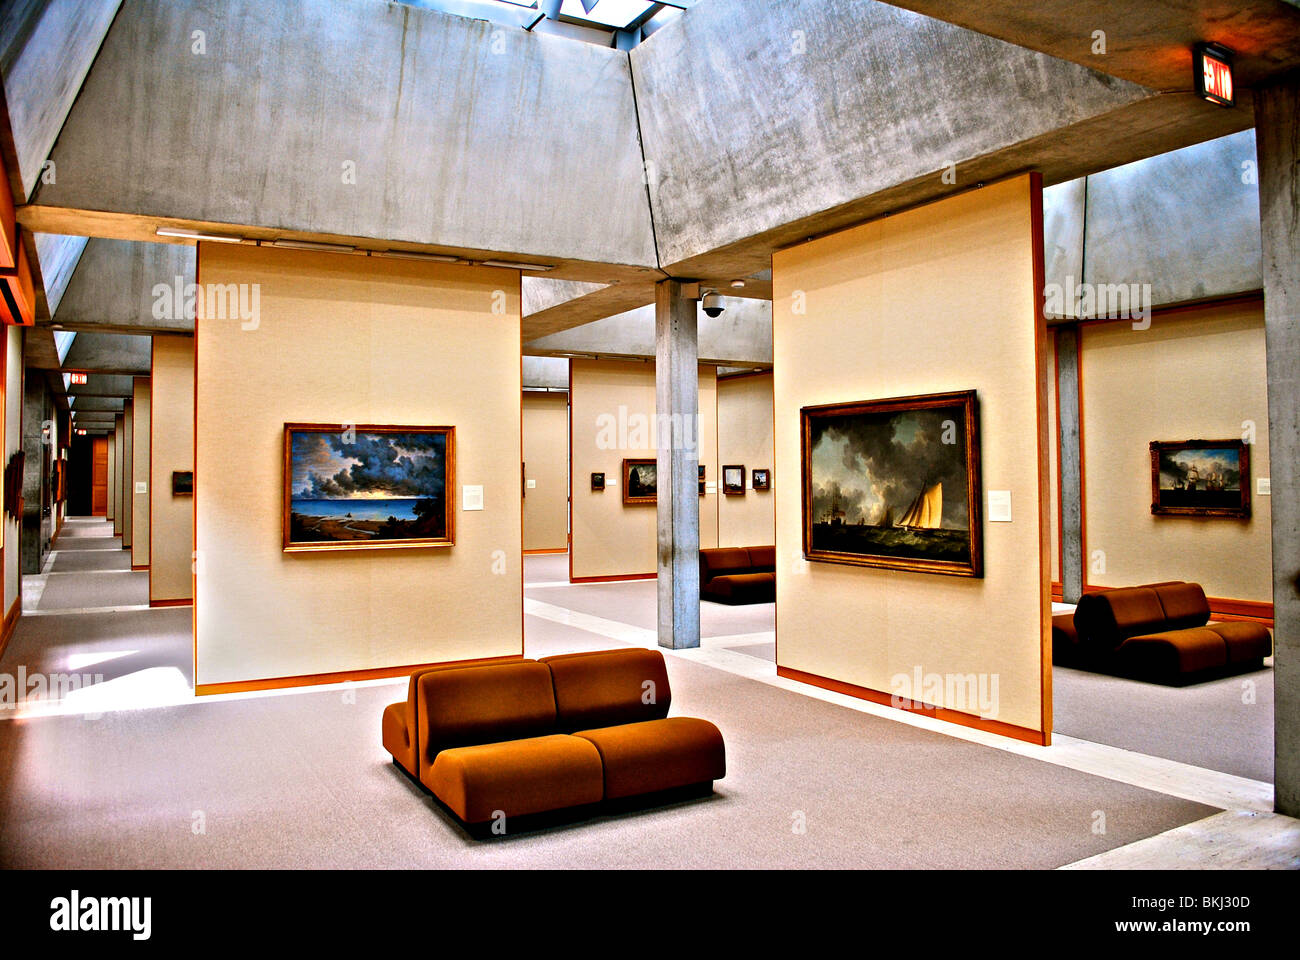 Yale Center for British Art, New Haven, United States, Louis Khan, Yale center for british art Stock Photo